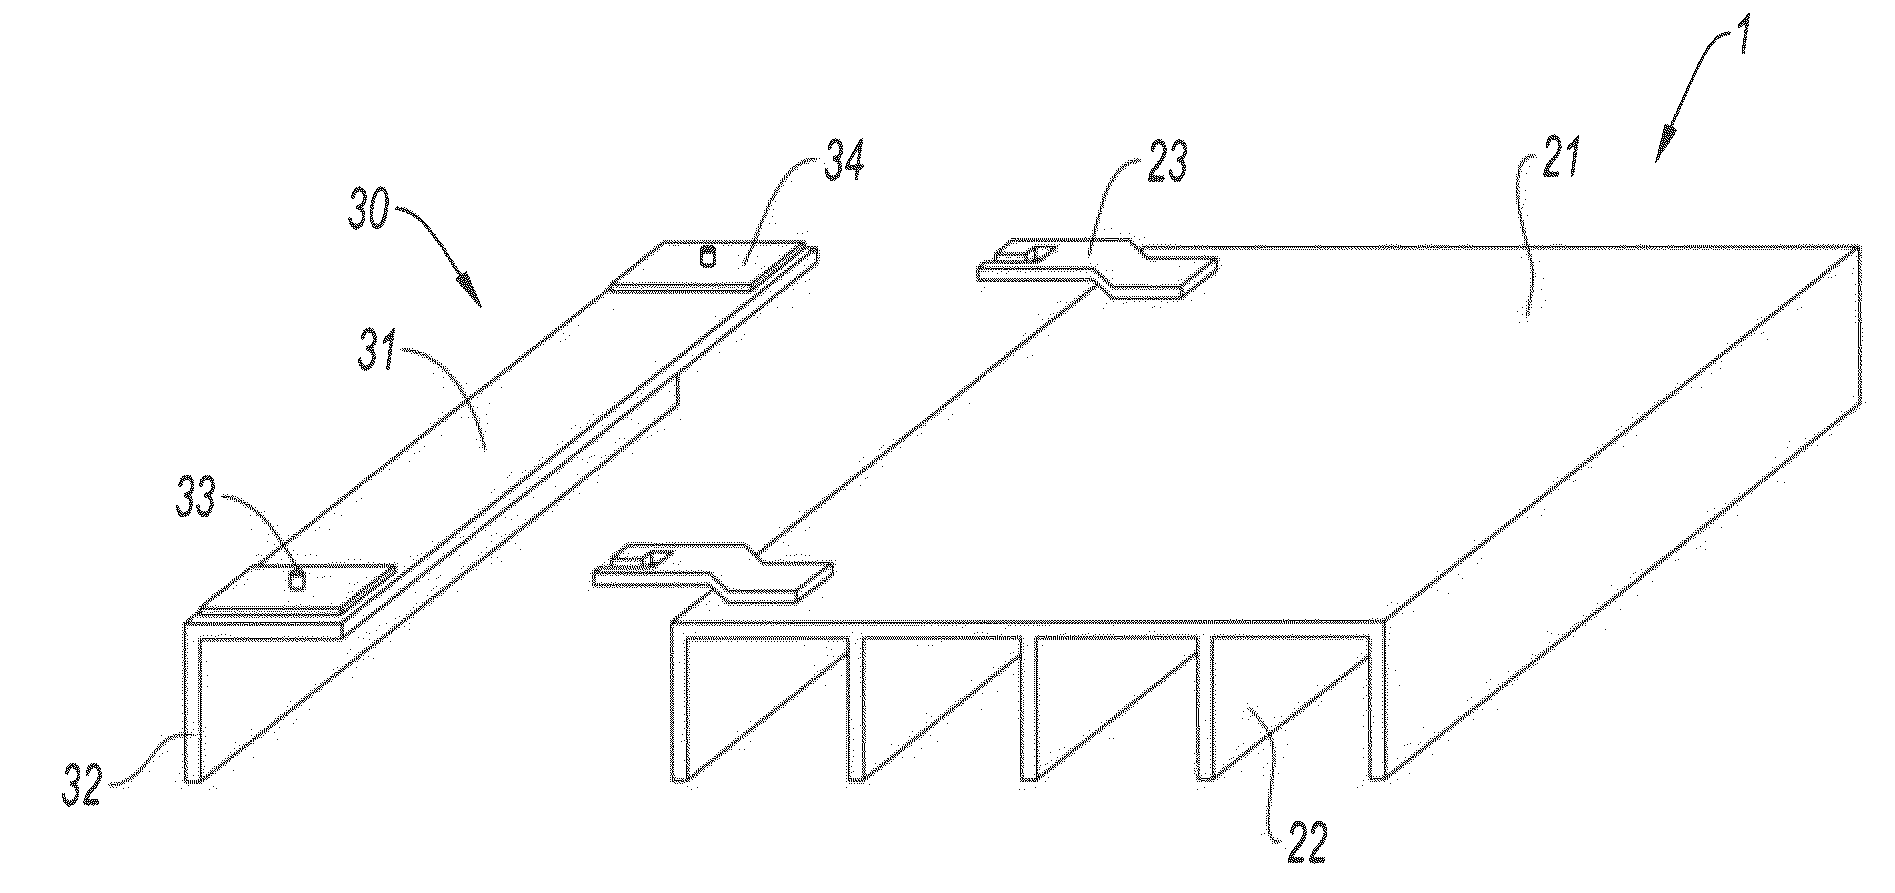 Expandable cableway for aircraft with a structure made of composite material